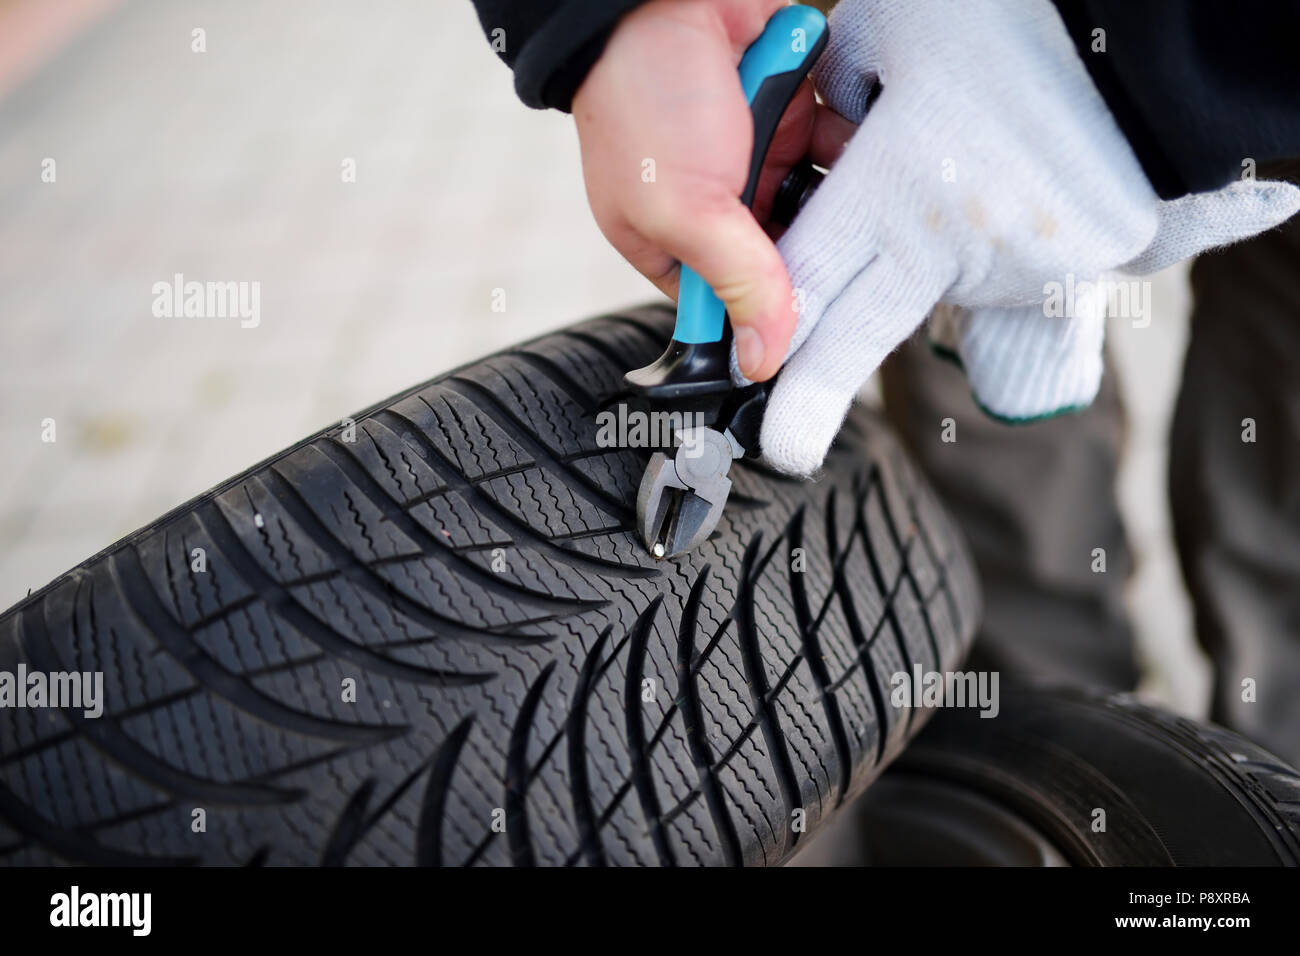 Pulling a nail out of tire Stock Photo - Alamy